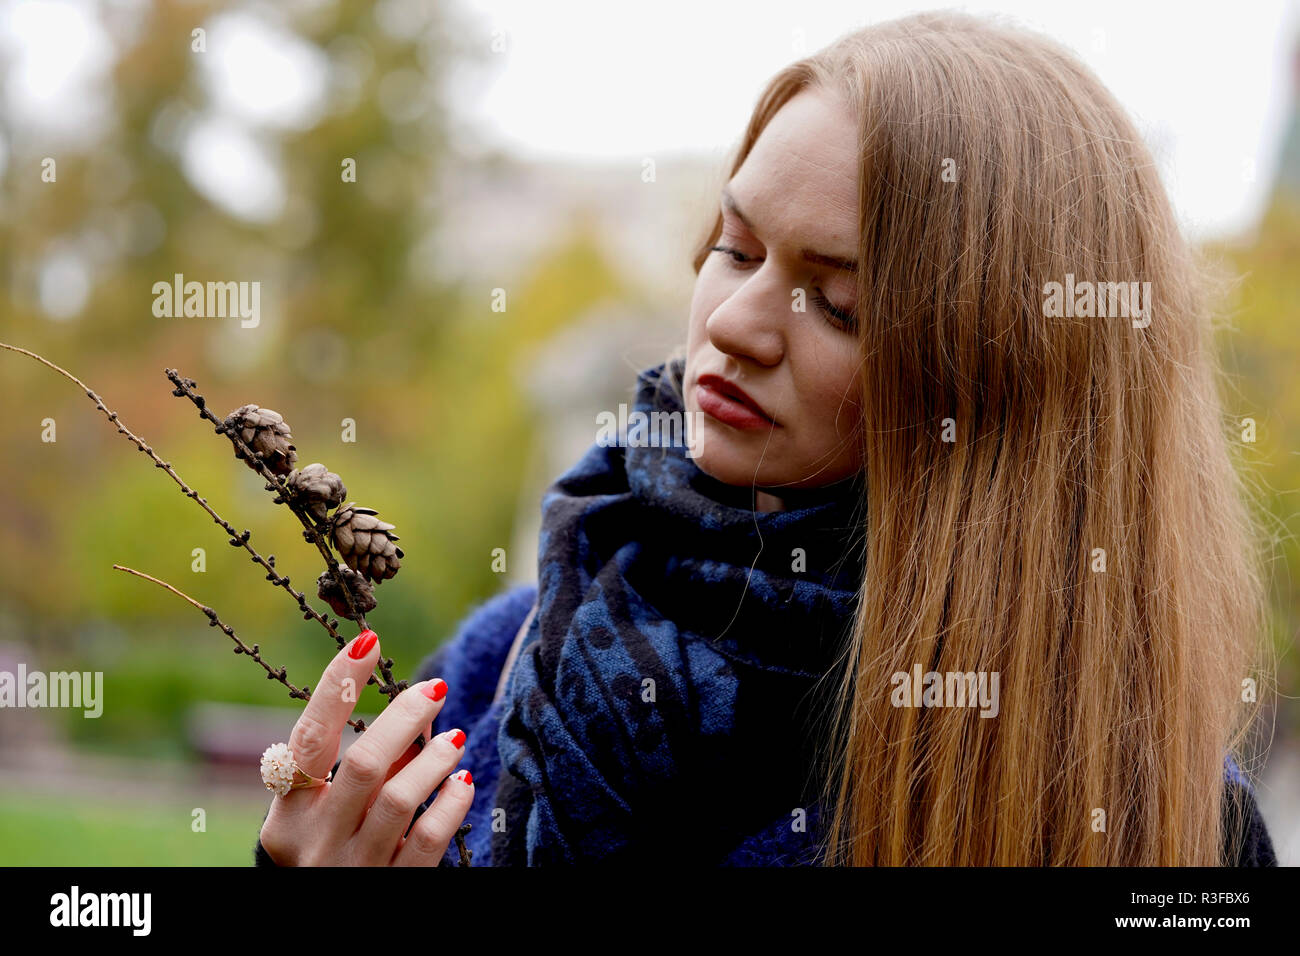 Russian girl shooting for autumn season in Moscow, Blue eye girl with blonde hairs Stock Photo